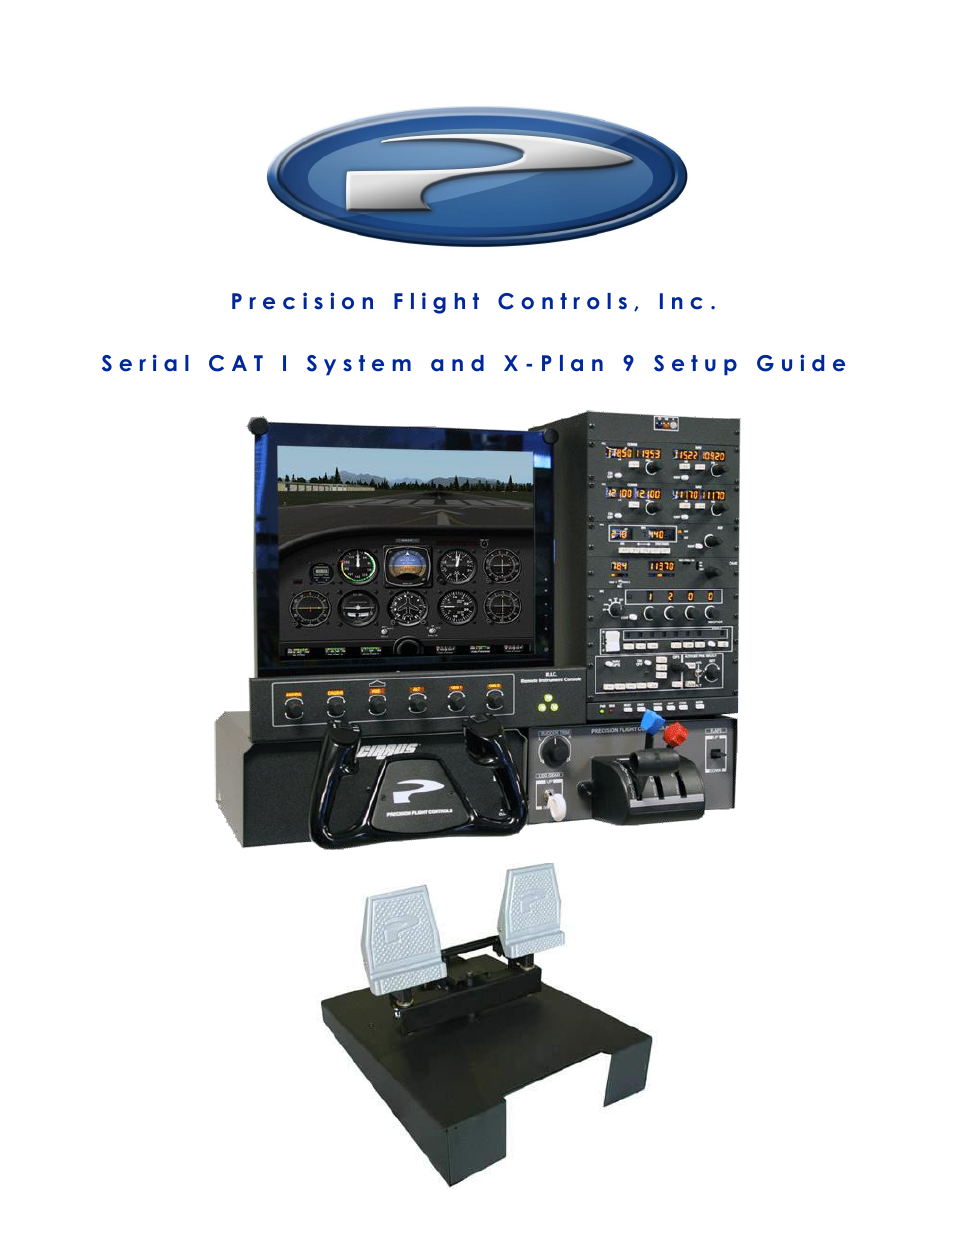 Serial CAT I and X-Plane 9